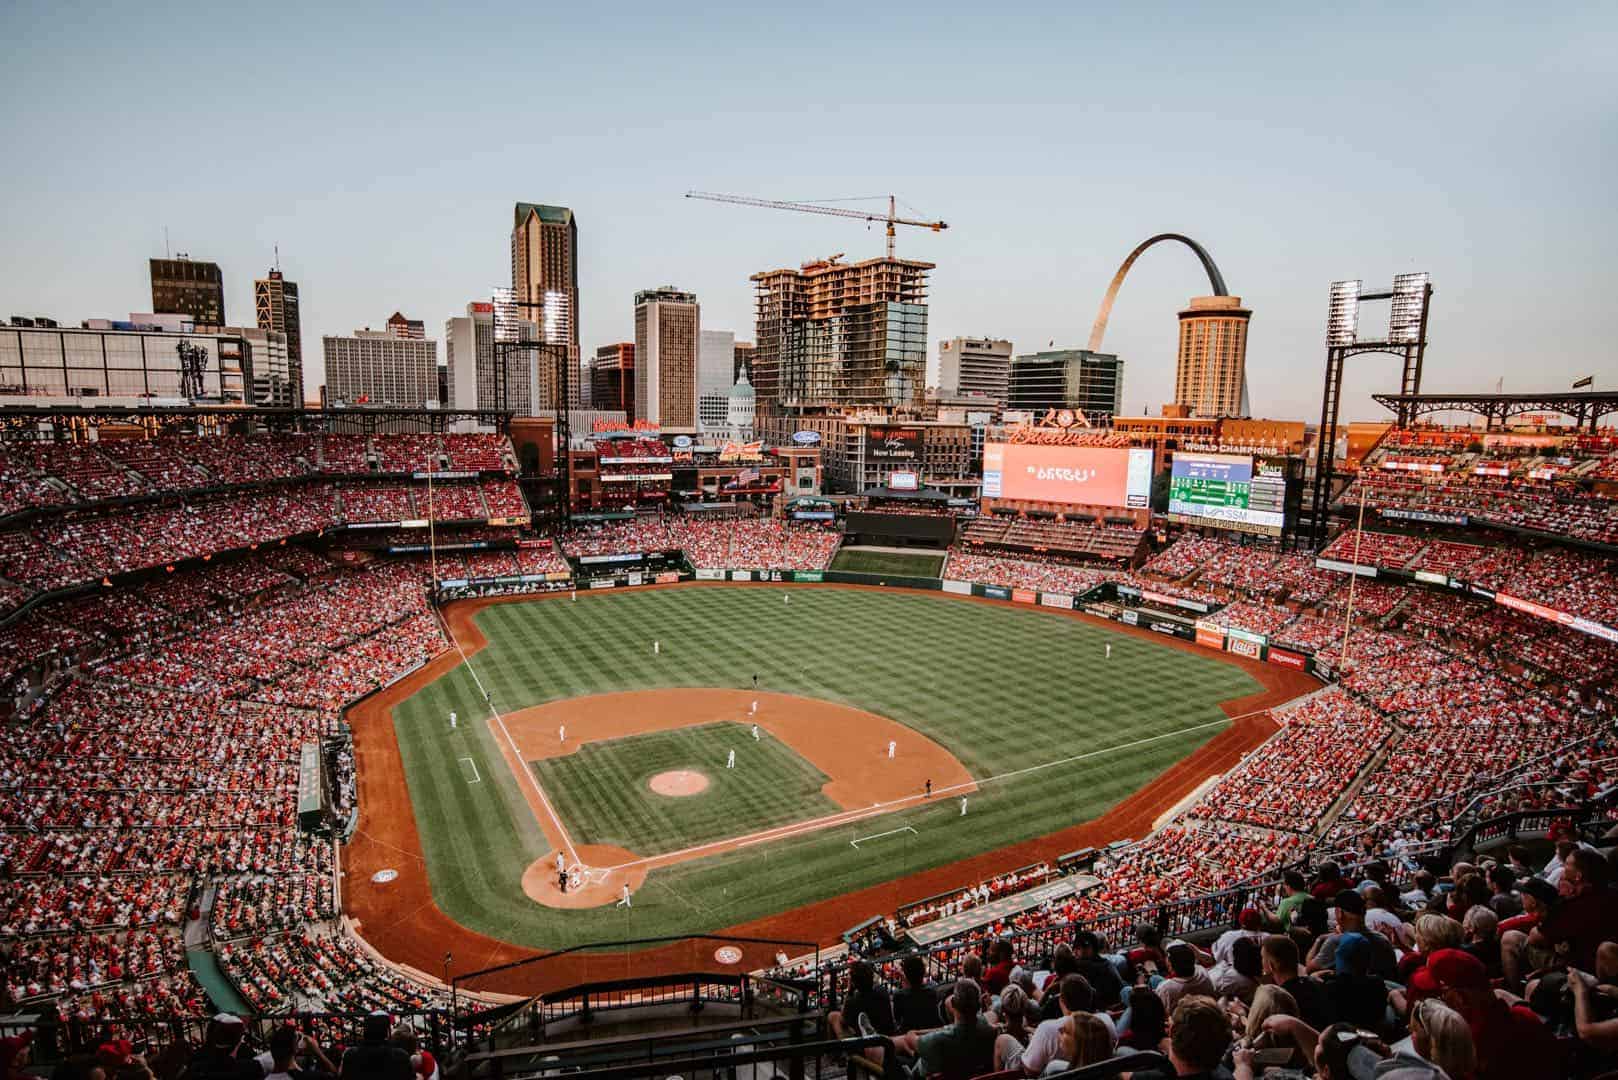 Busch Stadium with the Gateway Arch in the background